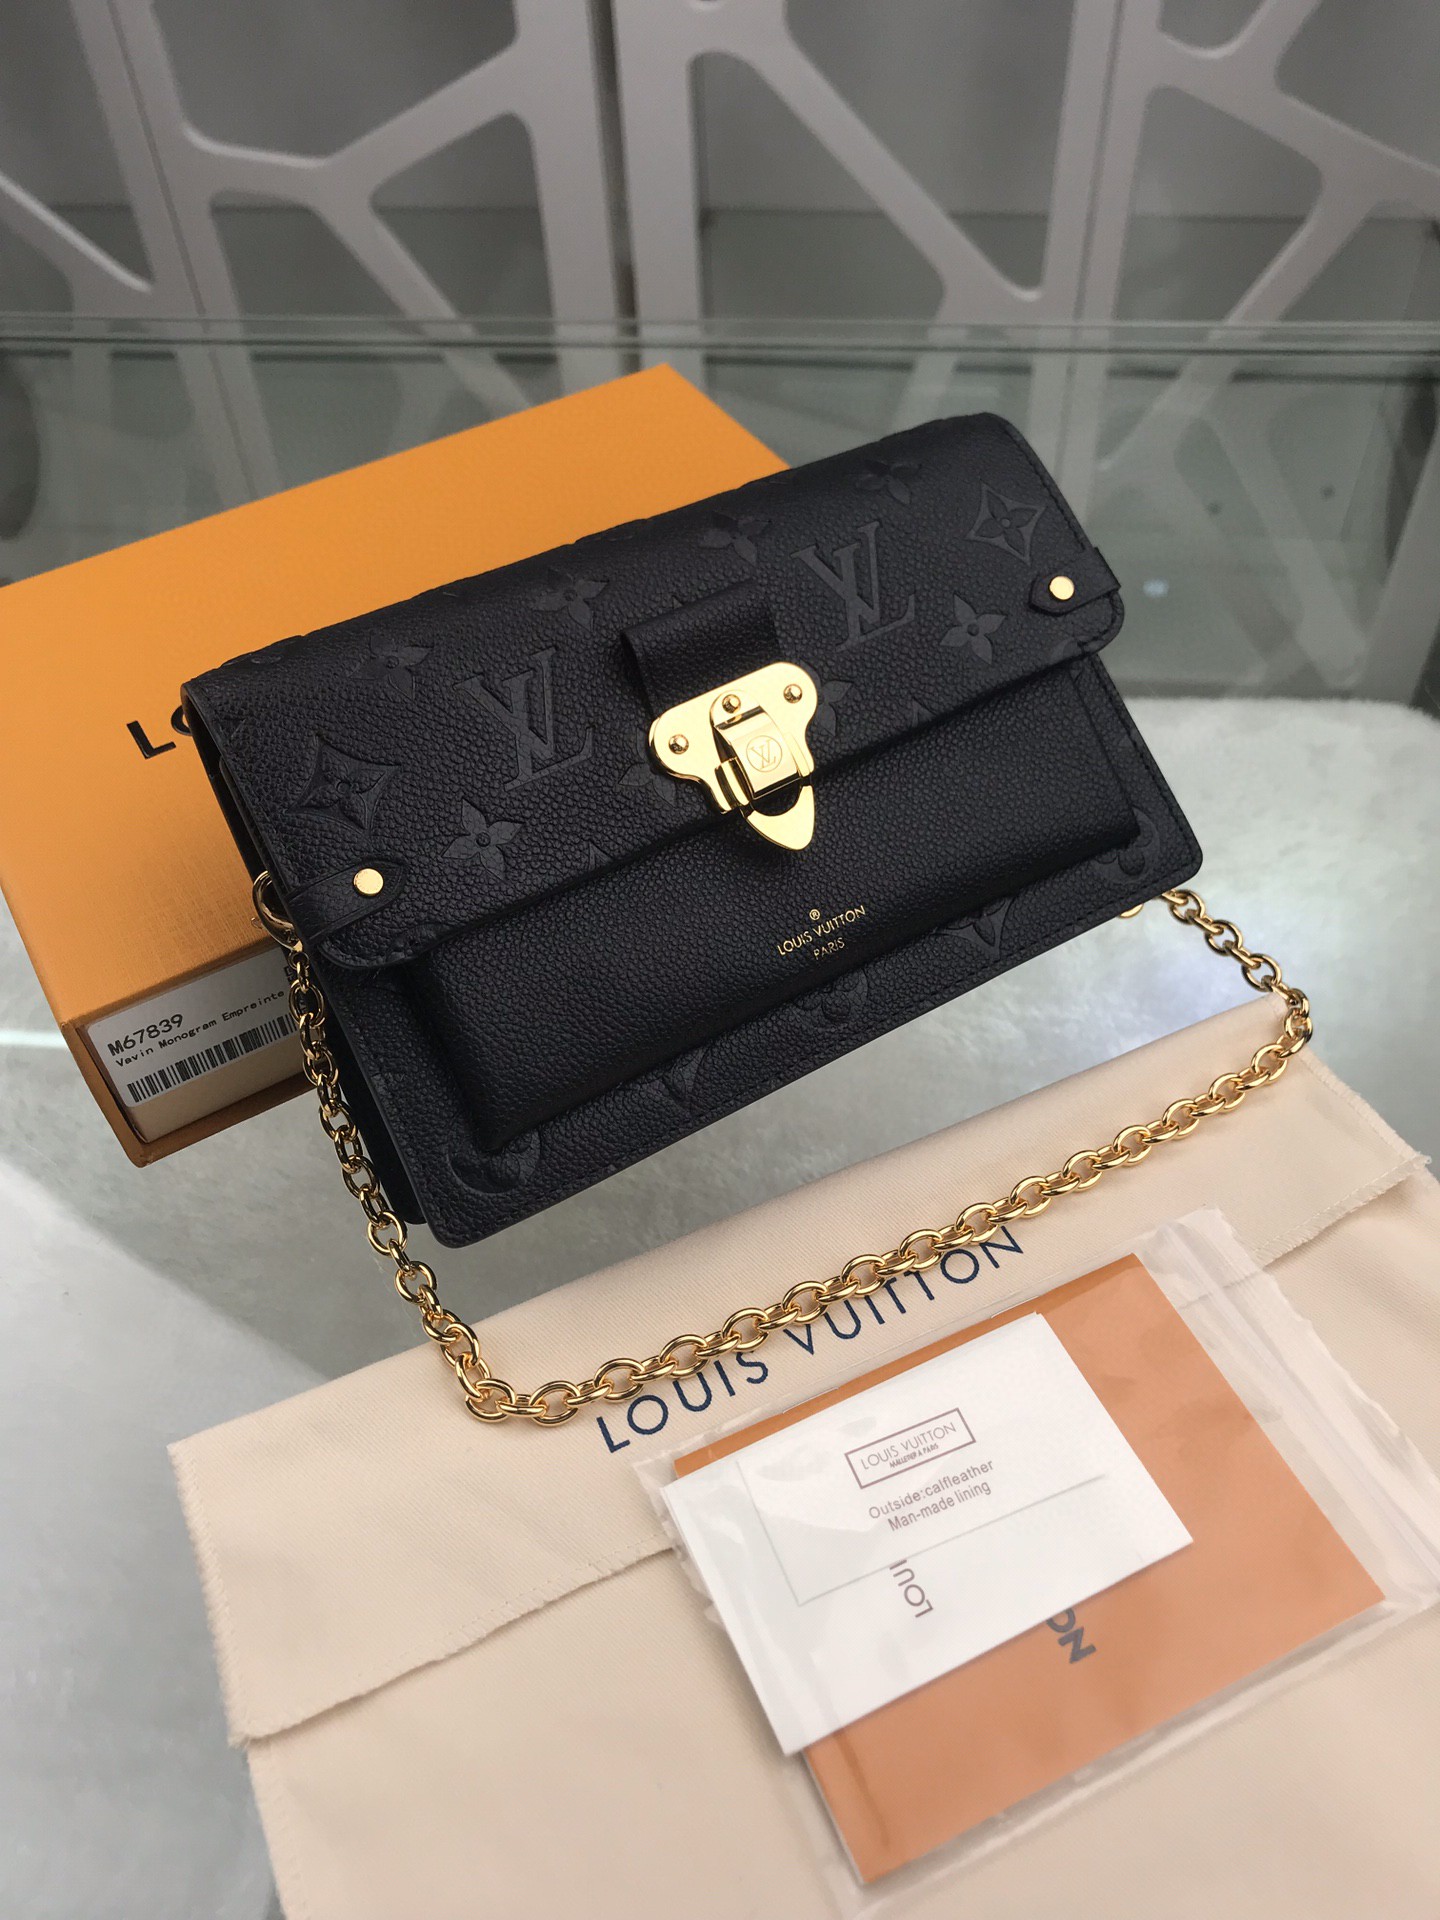 Lv Vavin Chain Wallet Reviewer